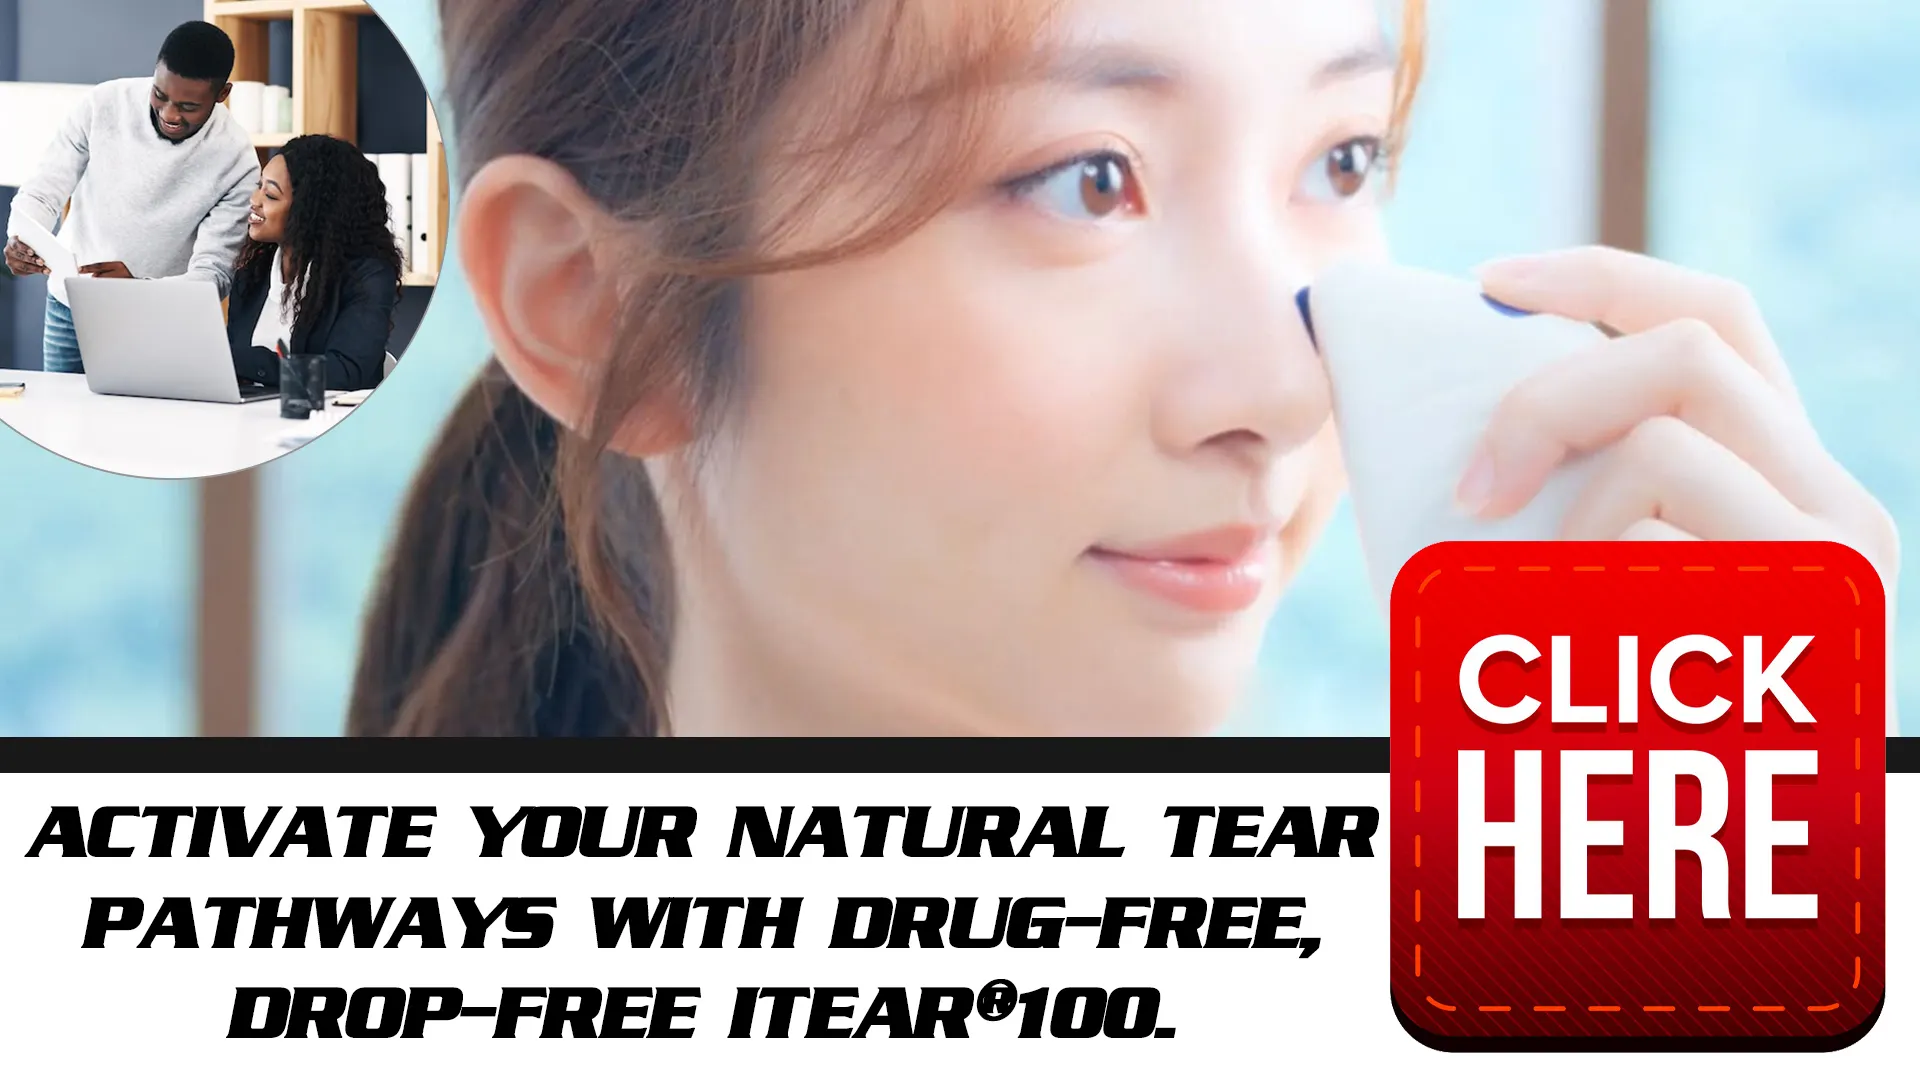 Introducing iTEAR100: Your At-Home Dry Eye Hero